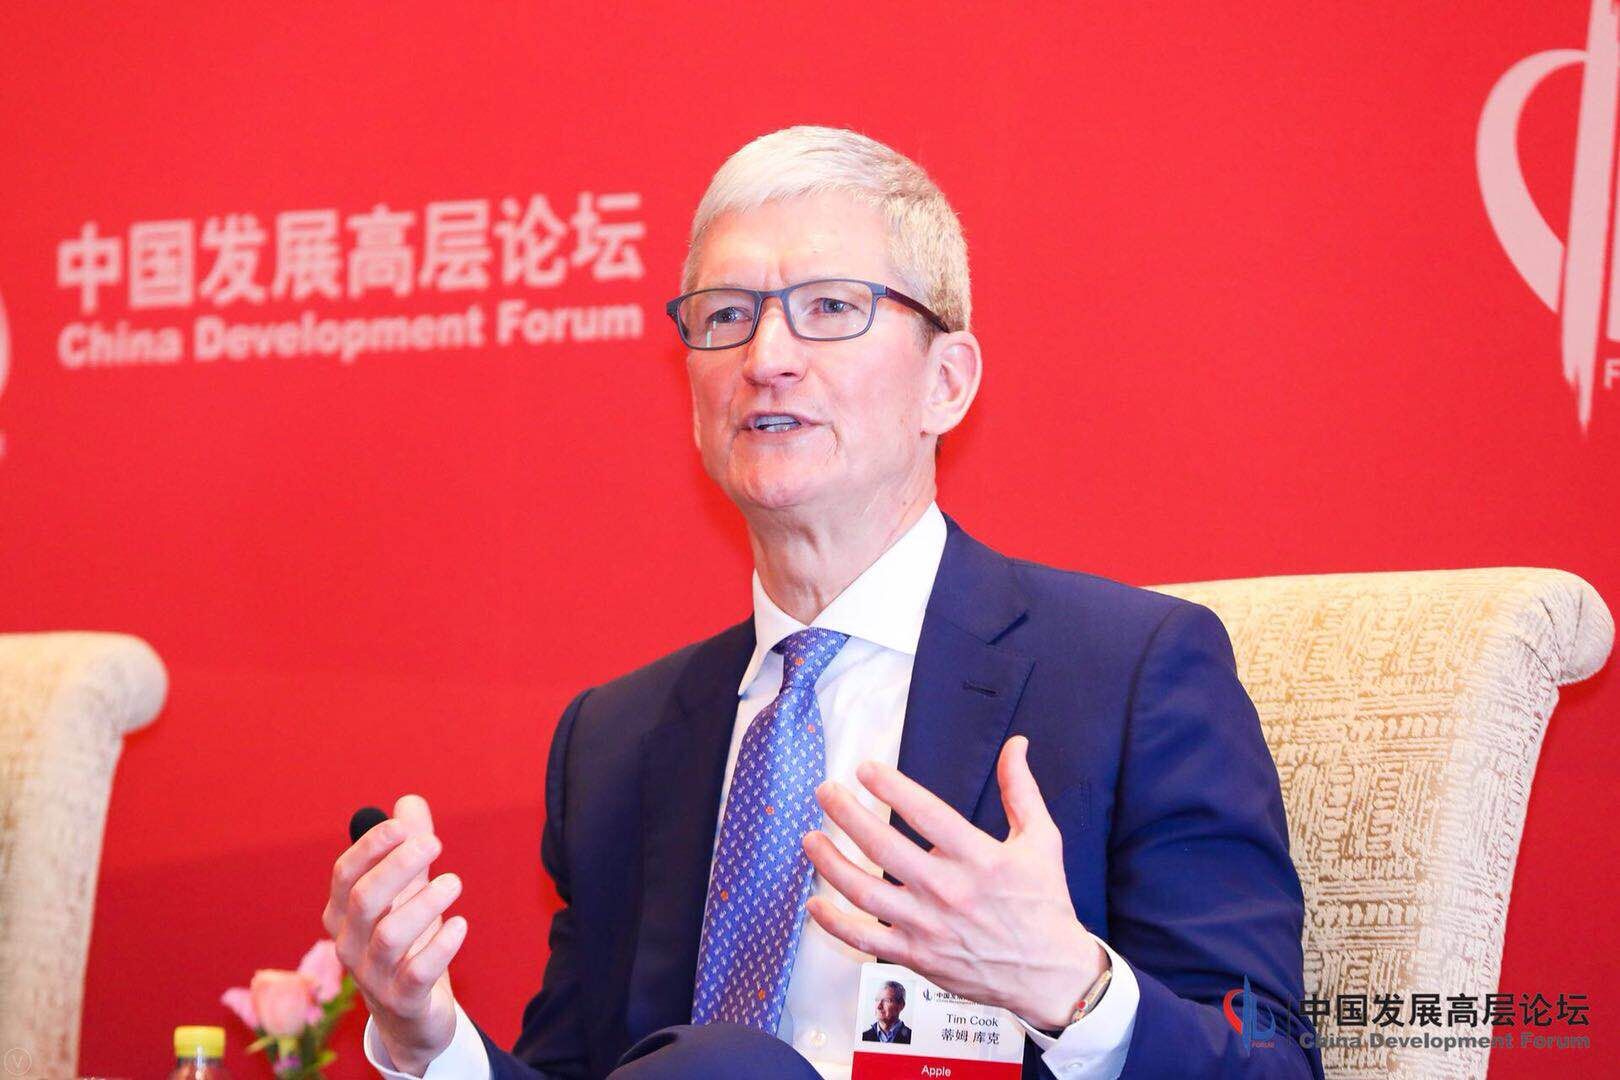 Apple CEO Tim Cook, speaks at the Economic Summit of the annual China Development Forum in Beijing on March 24, 2018. [Photo courtesy of China Development Forum]